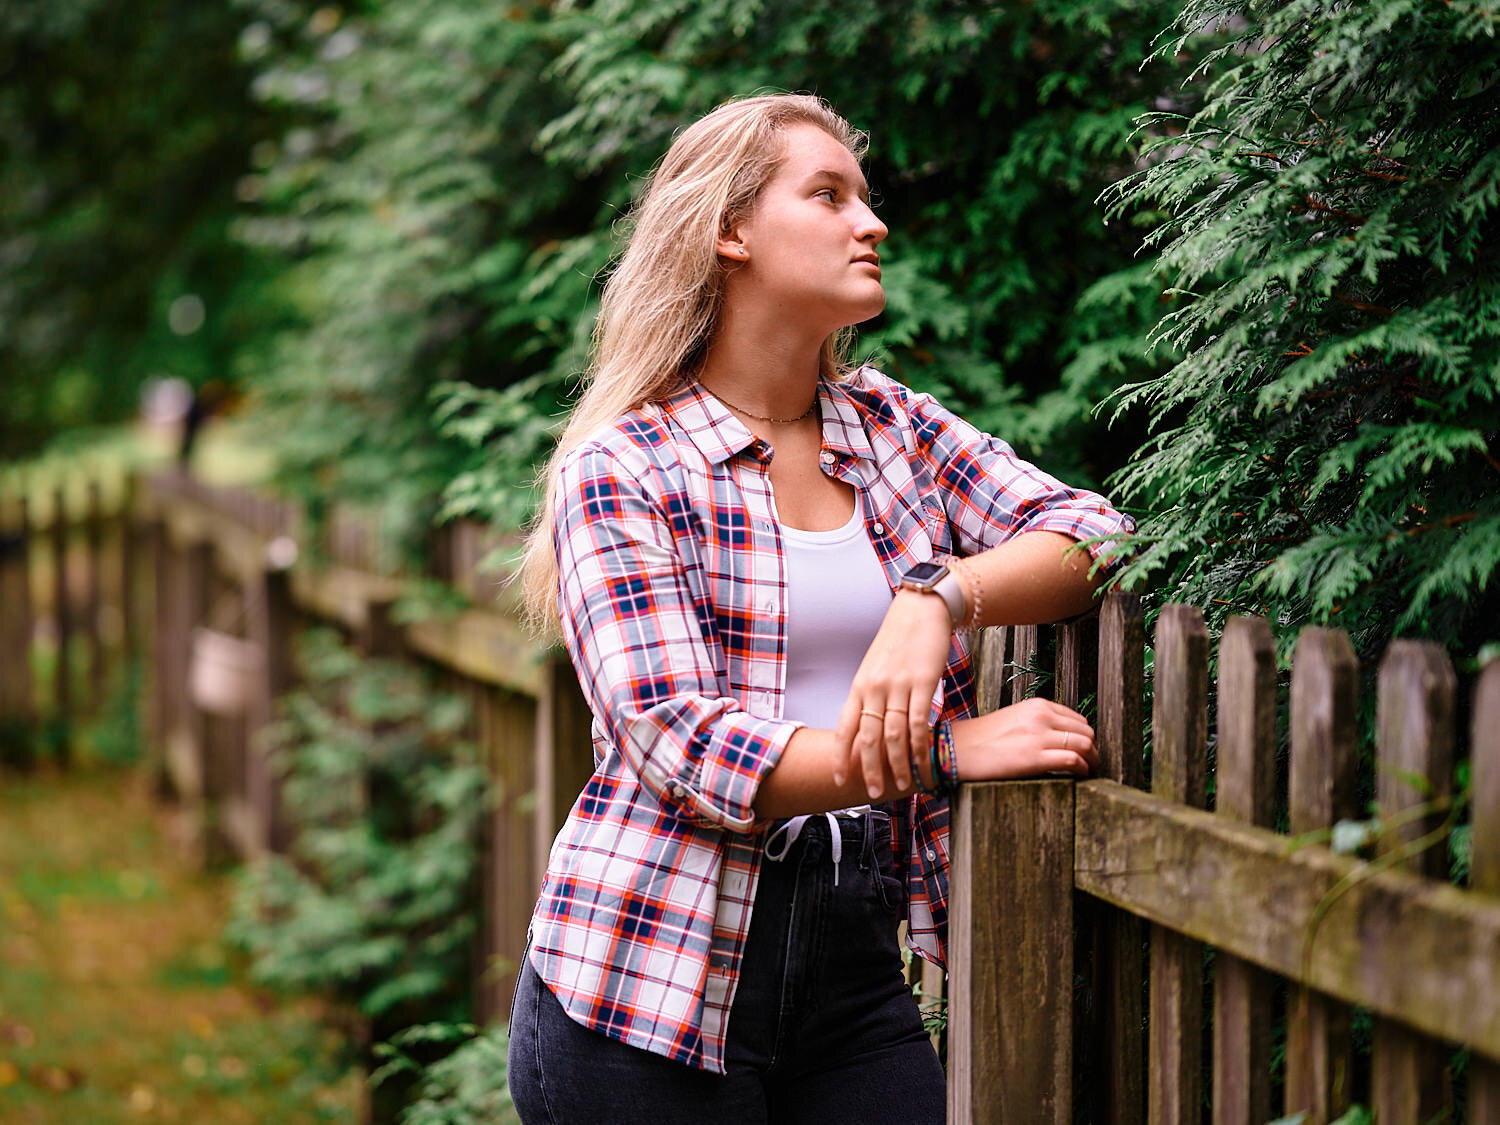  Alena is posing for a moody teenager photo series in her backyard on a rainy evening in Pittsburgh, Pennsylvania. She is dressed in her new checked shirt and flare jeans and looks cool and stylish. 